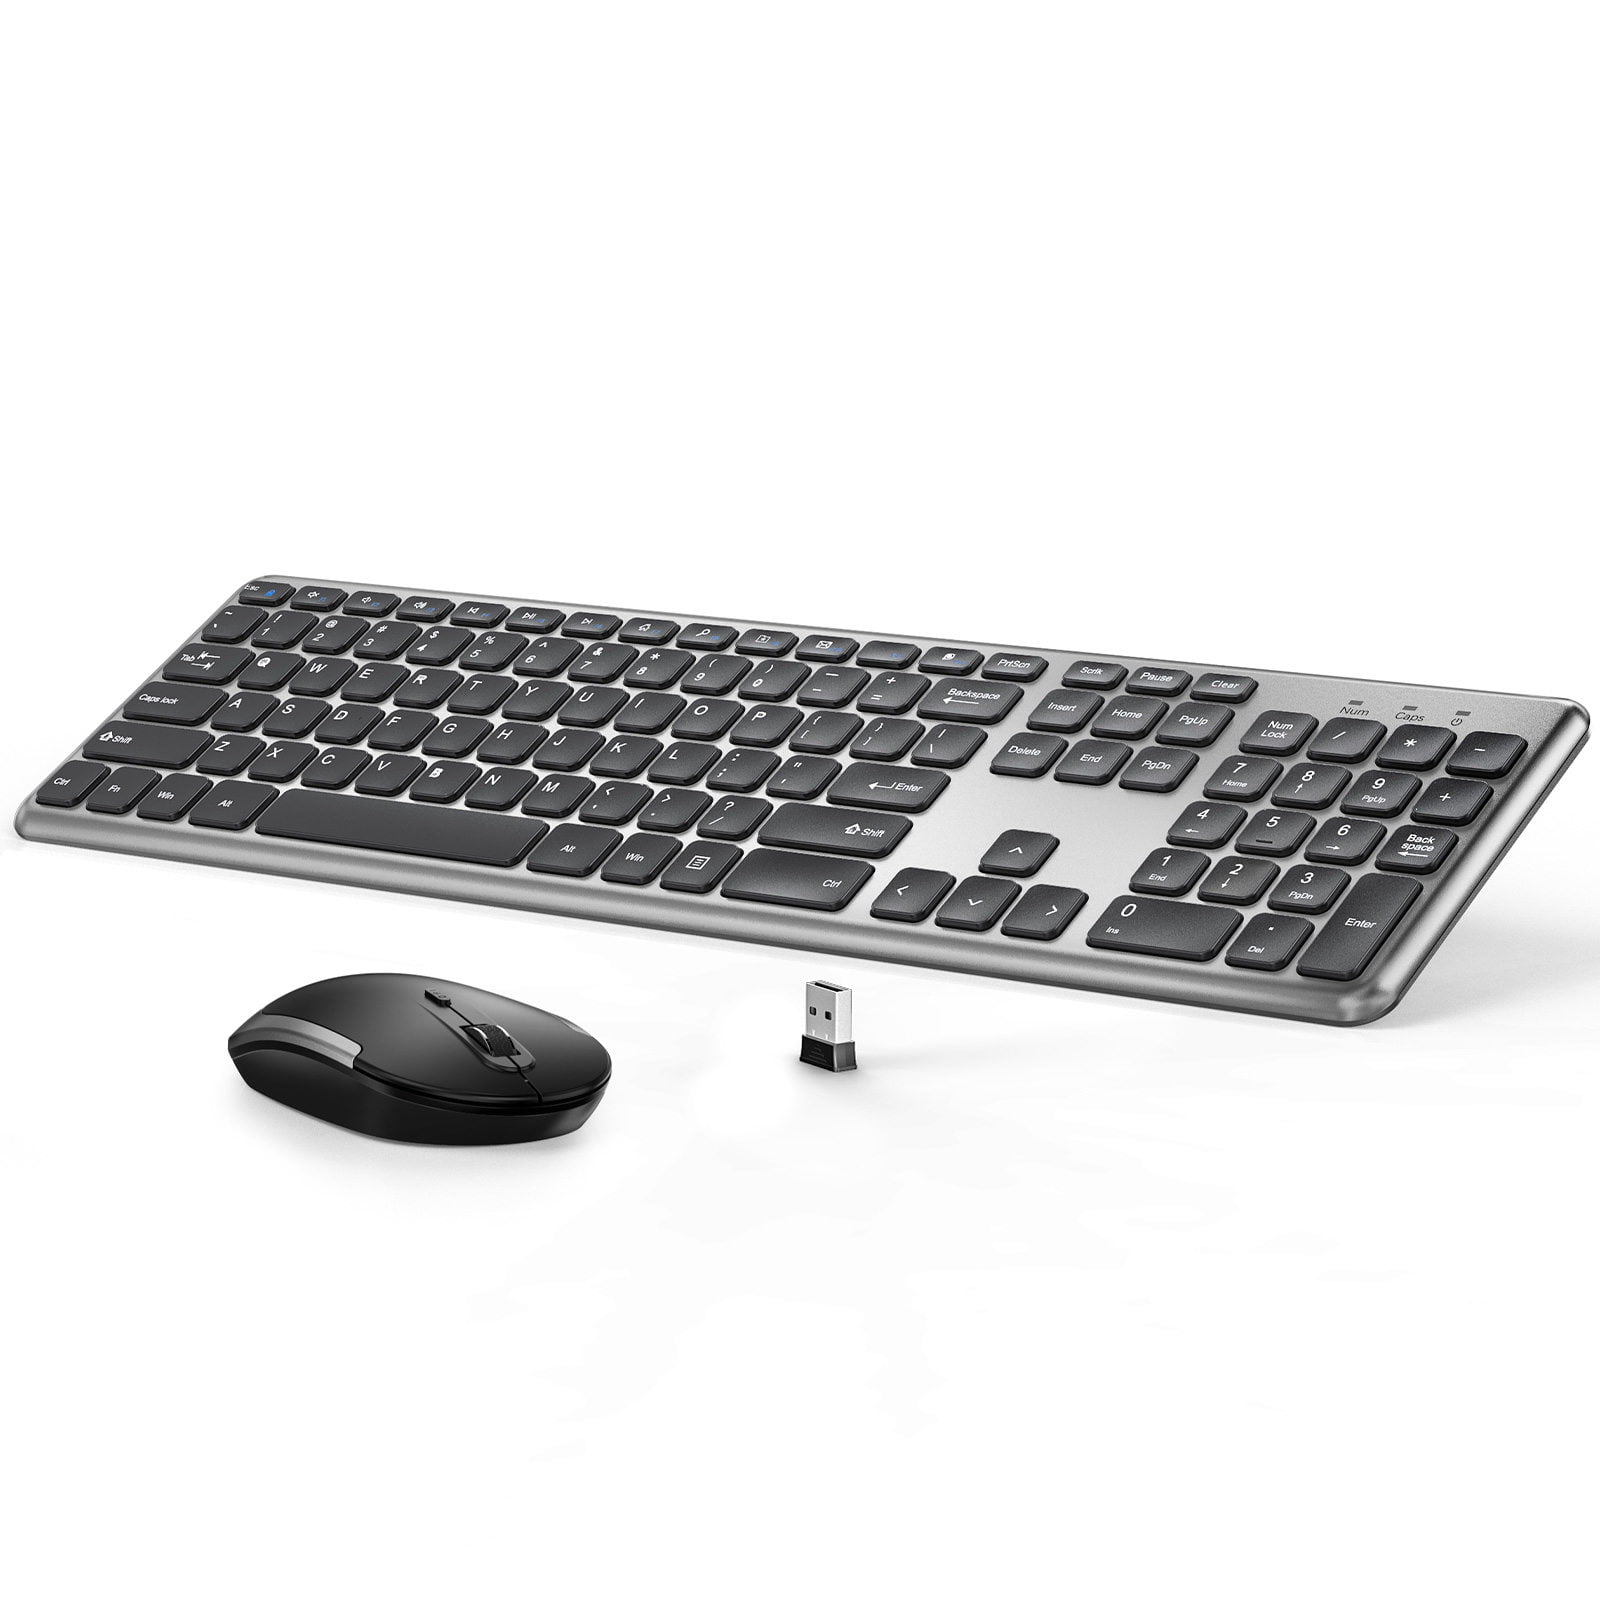 Suproot Wireless Keyboard and Mouse, Black 2.4GHz Ultra Thin Full 